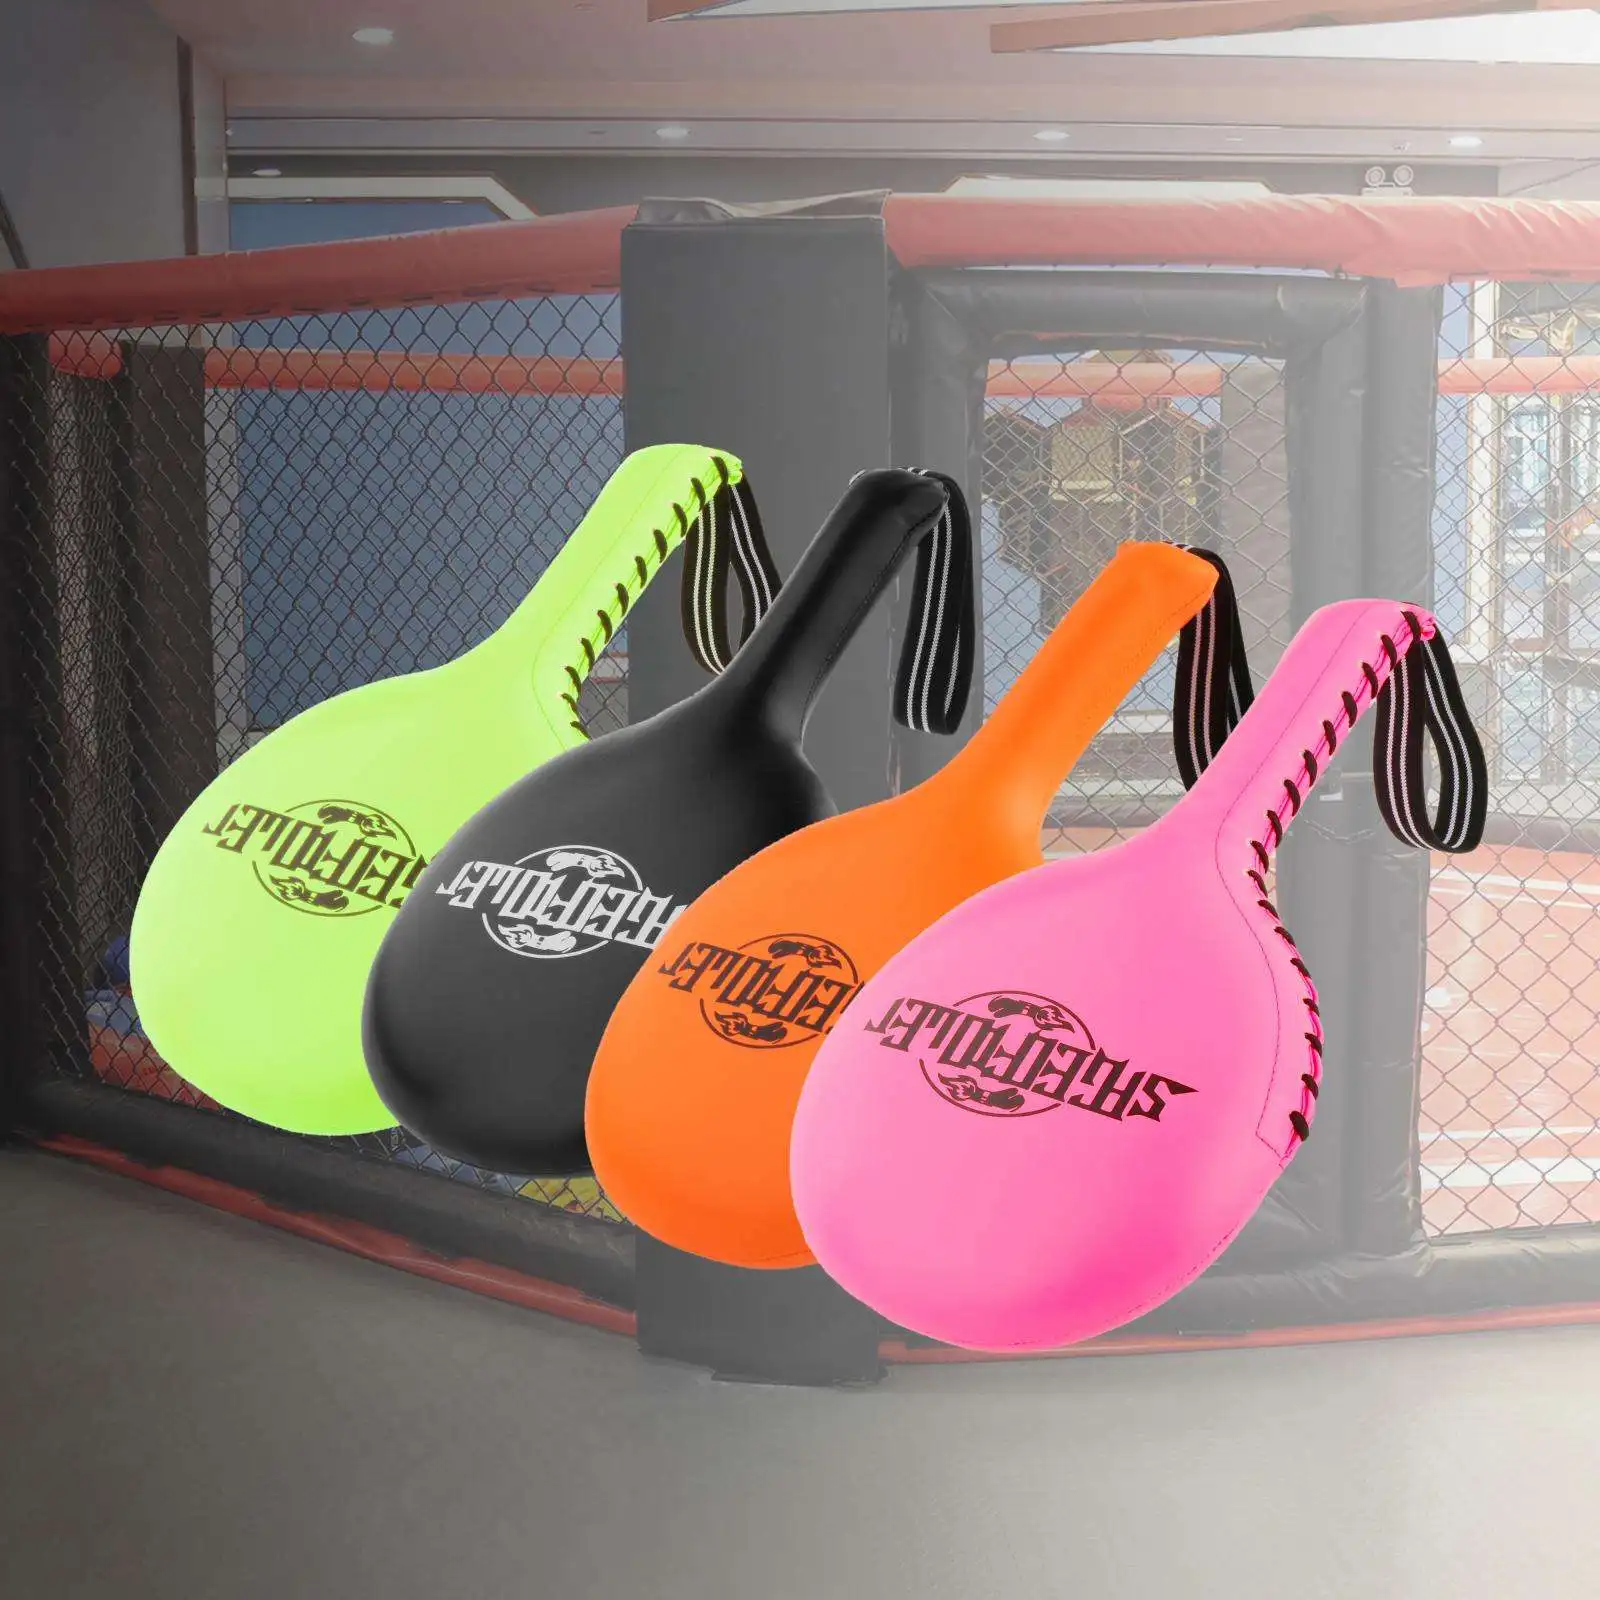 PU Leather Vertical Standing Boxing Target Multi Point MMA Martial Thai Kick Pad Karate Training Focus Punch Pads